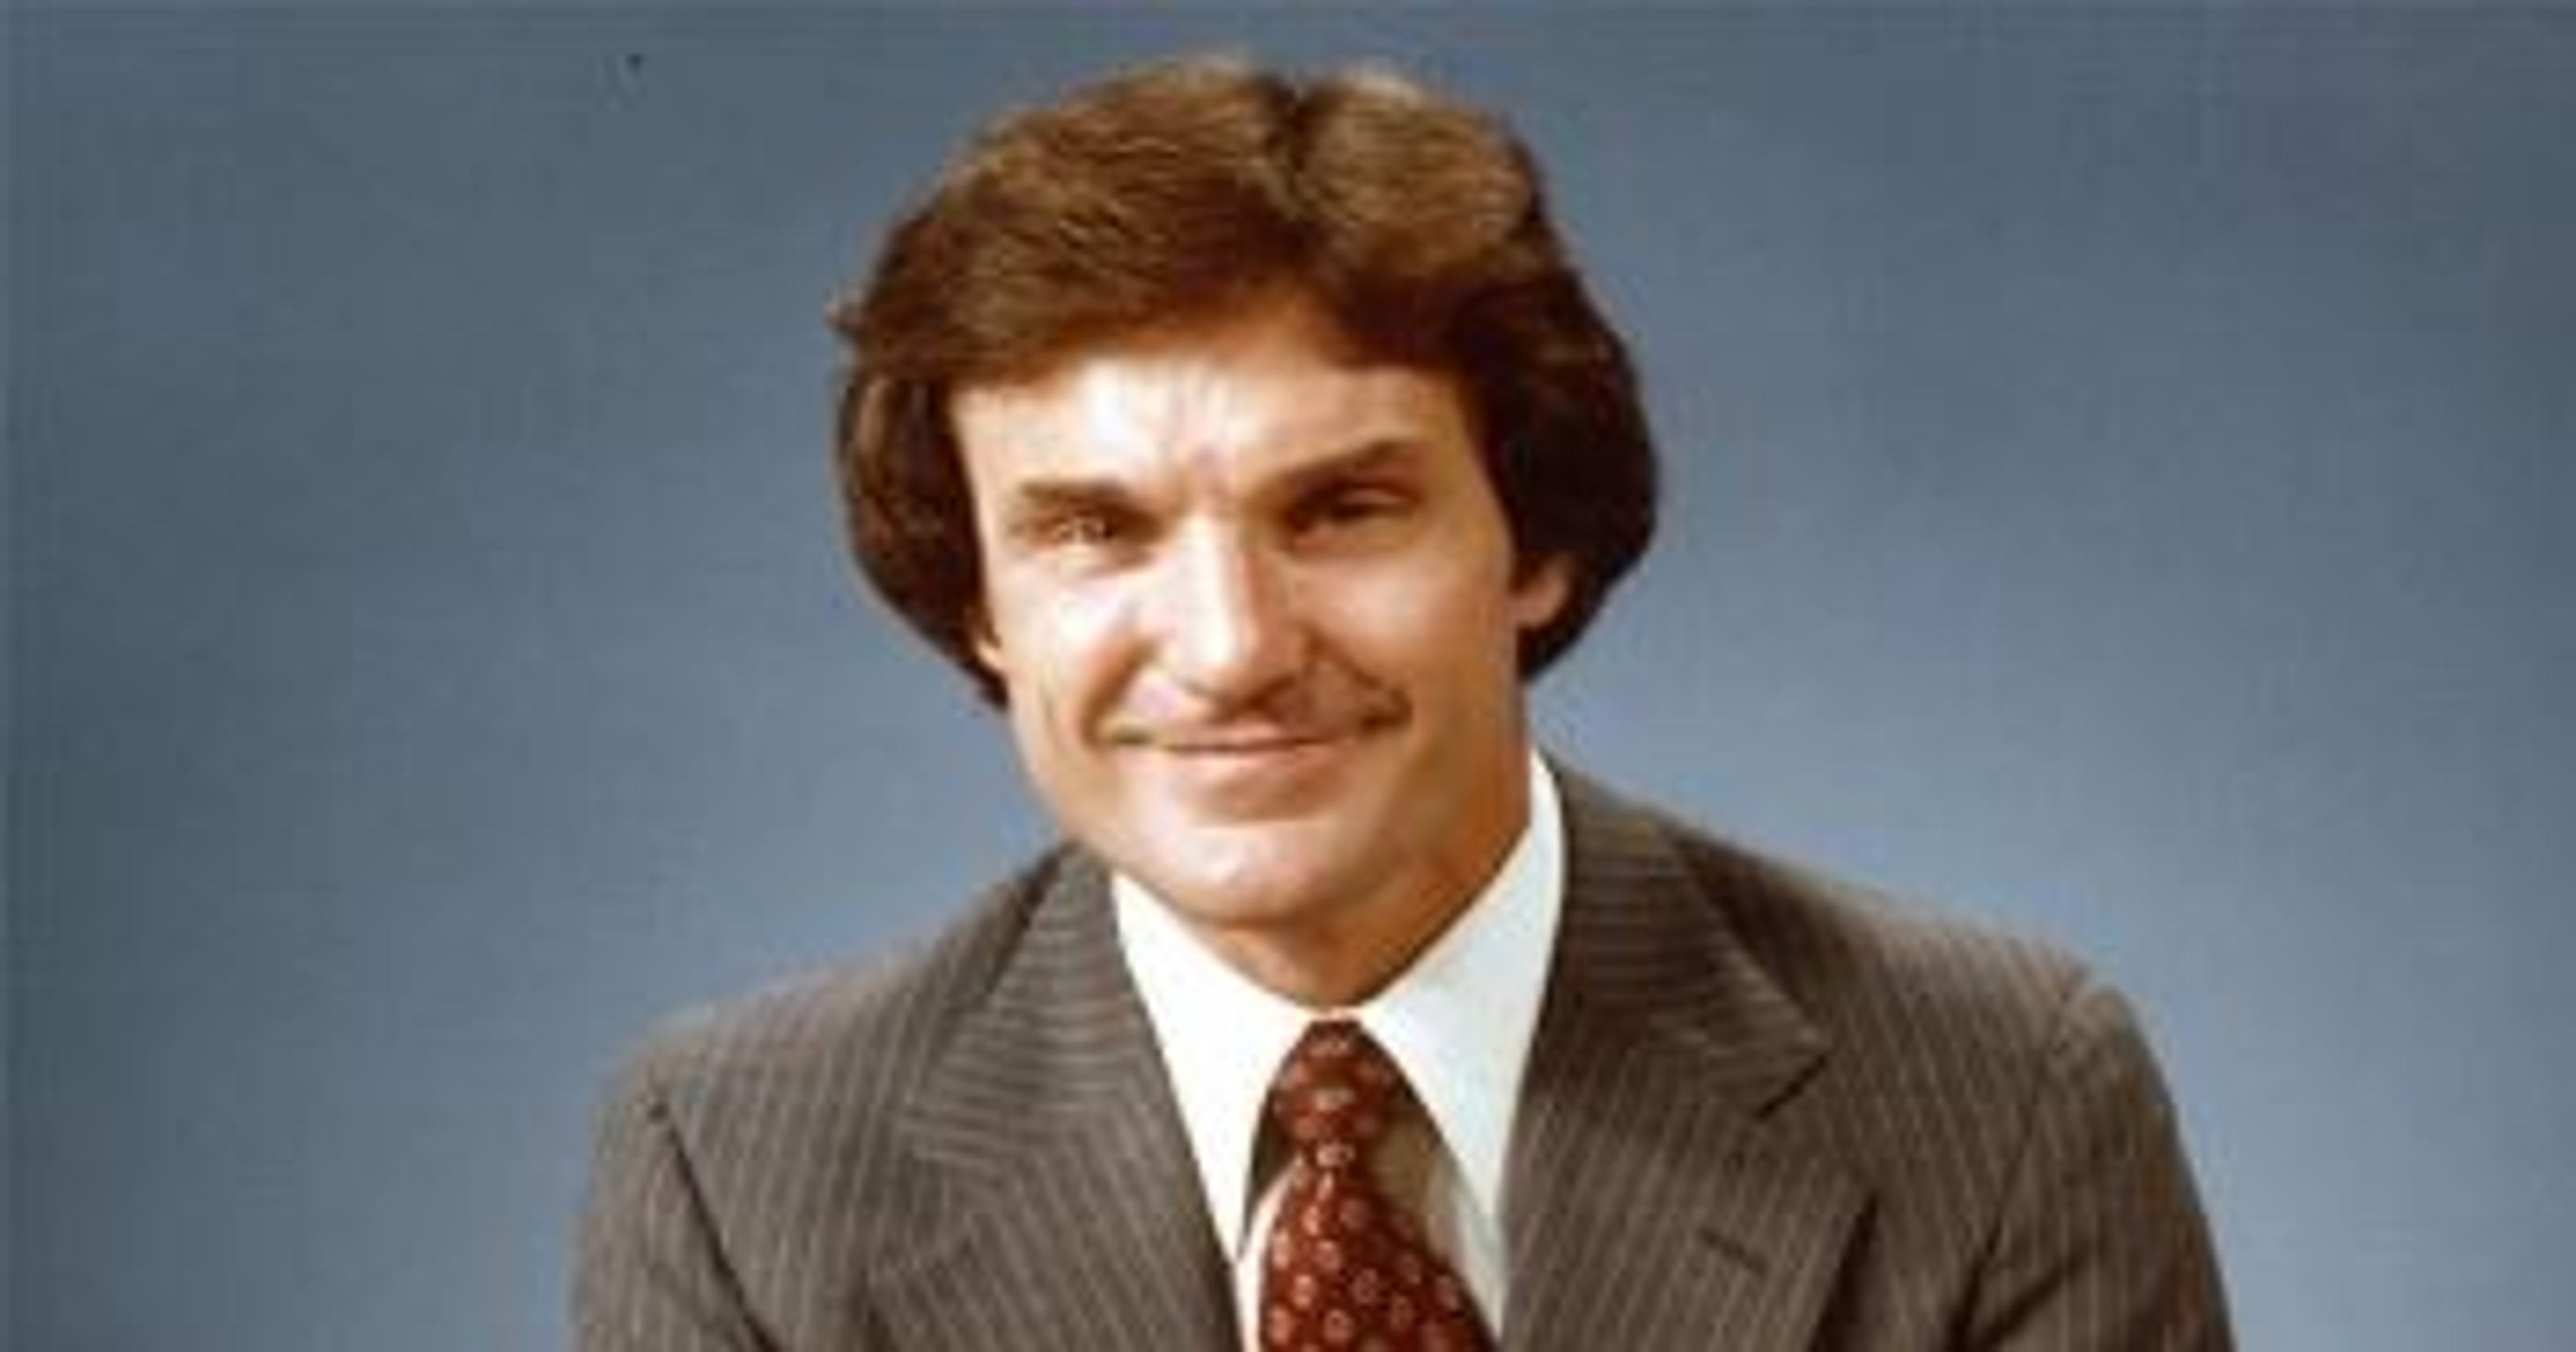 Jim O'Brien remembered Action News weatherman died 35 years ago today